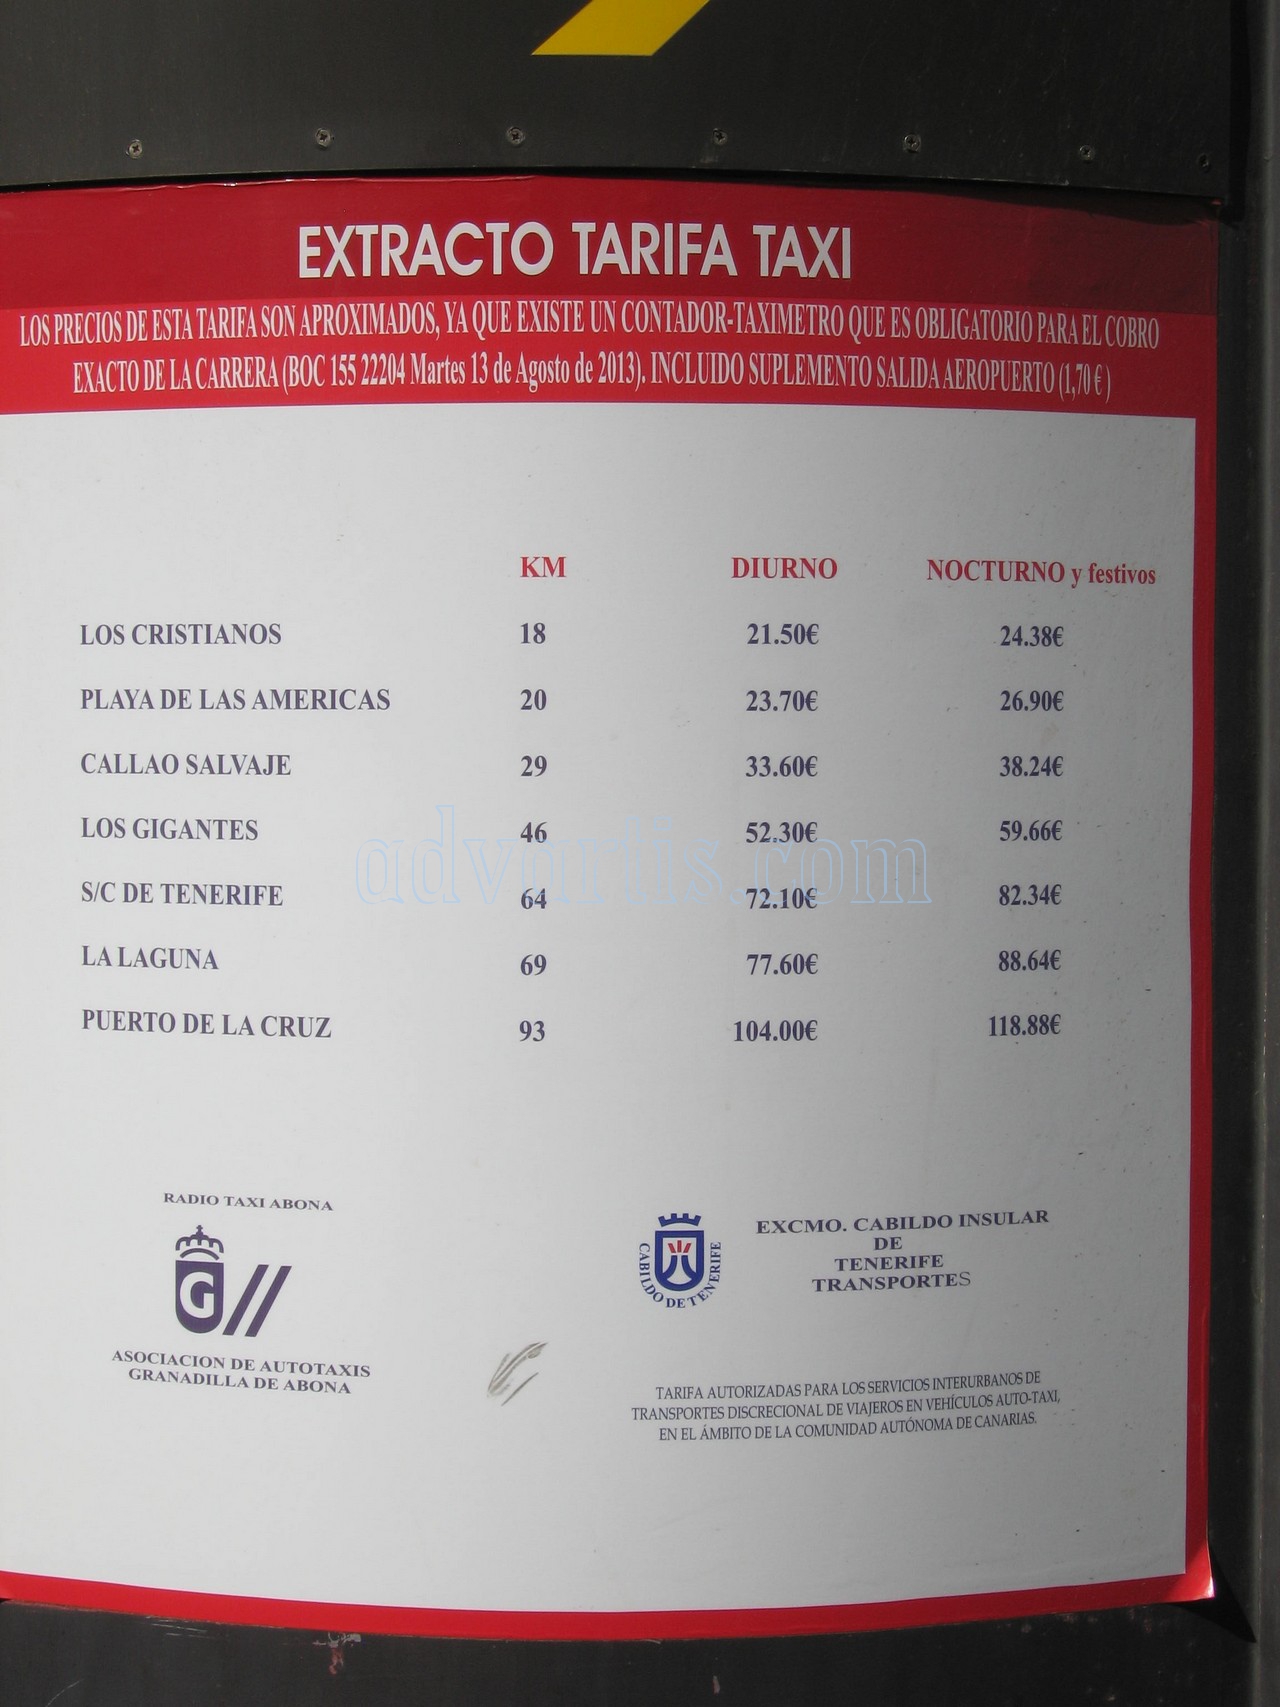 Tenerife south airport taxi rates